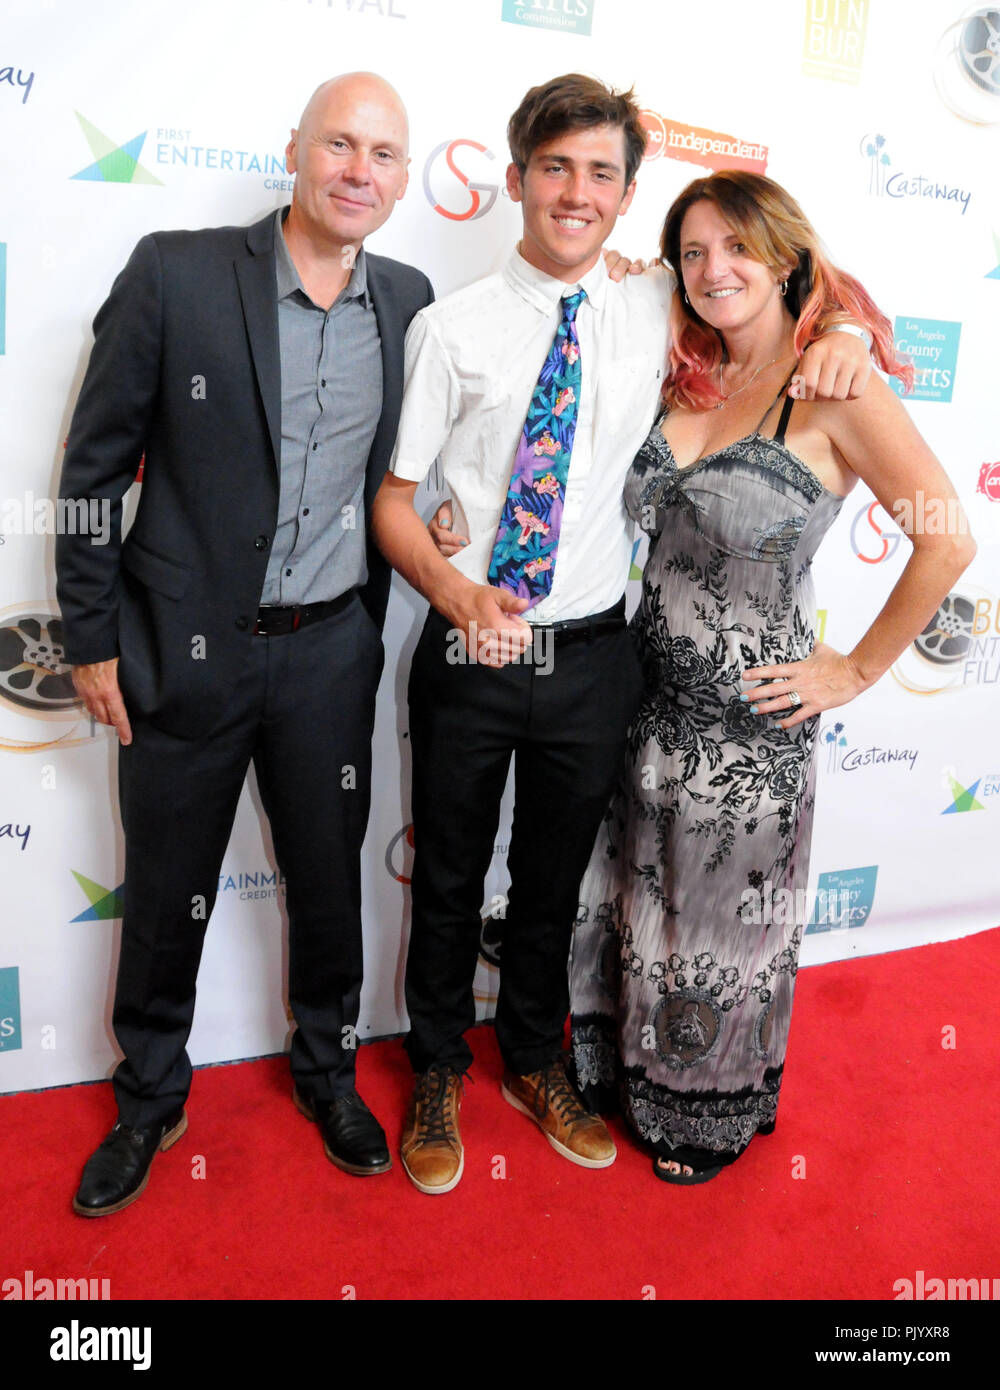 Burbank, USA. 9th Sept 2018. Photographer Stewart Cook, son Filmmaker Jackson Cook and producer Jennifer Magee-Cook attend the 10th Annual Burbank International Film Festival Closing Awards Show on September 9, 2018 at Los Angeles Marriott Burbank Airport Hotel in Burbank, California. Photo by Barry King/Alamy Live News Stock Photo